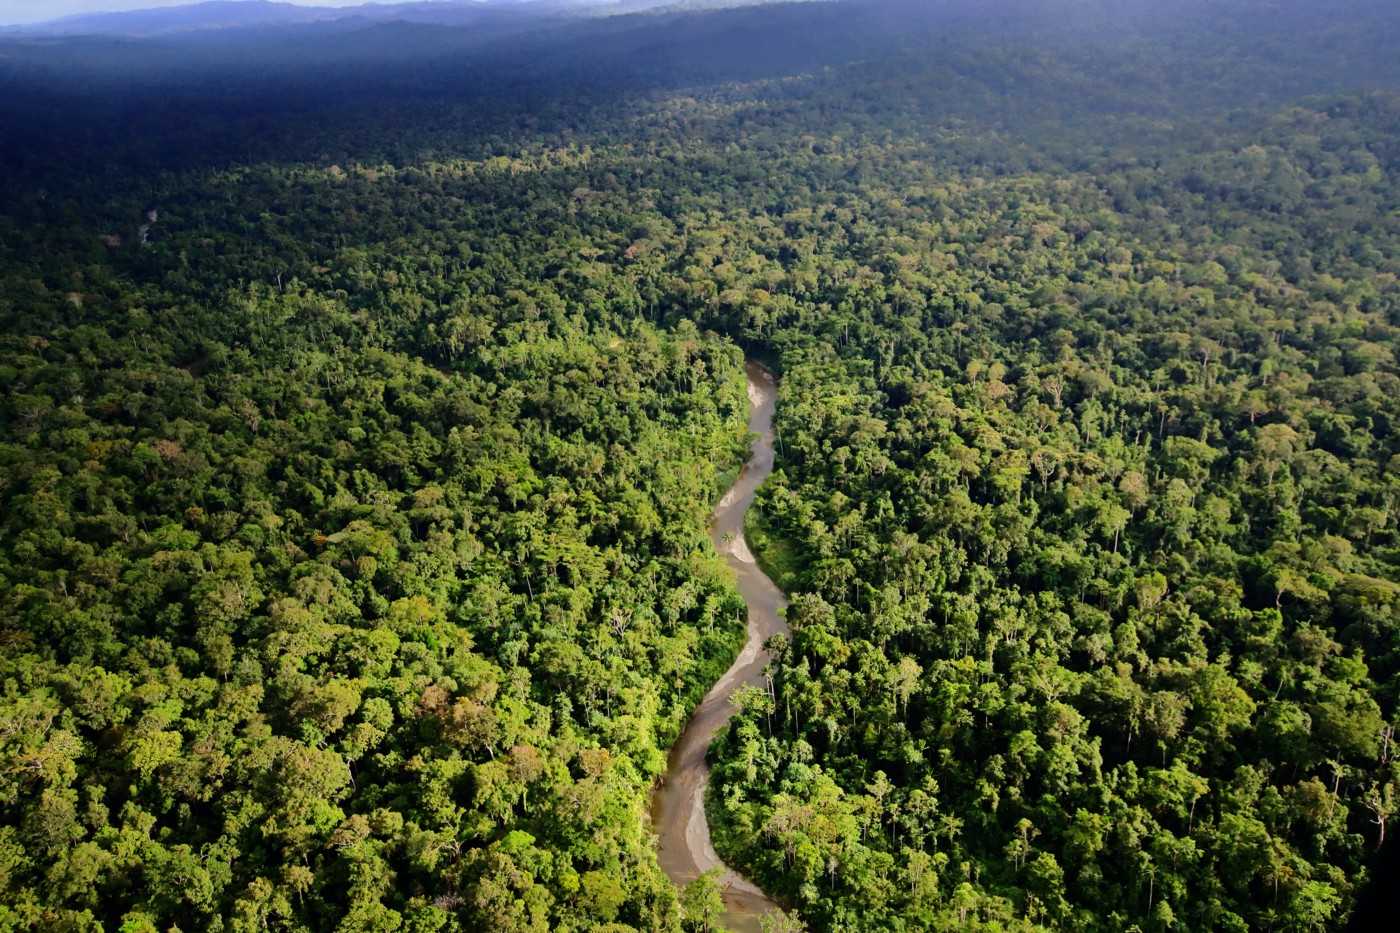 Rainforest in Boven Digoel district, Papua, in February 2020.